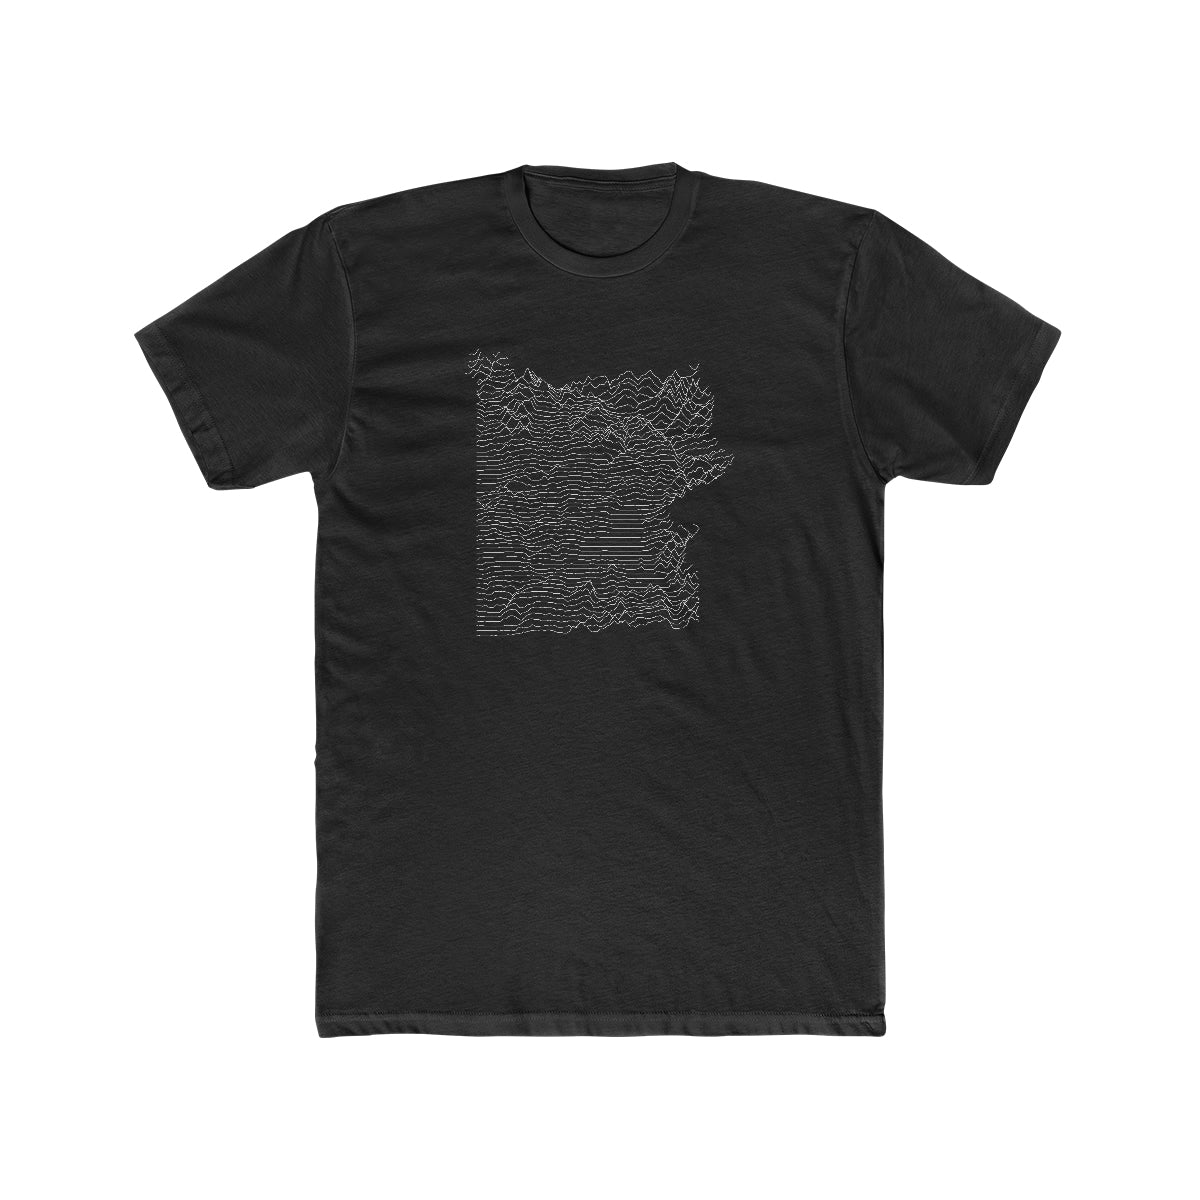 Limited Edition Yellowstone National Park T-Shirt - Lines